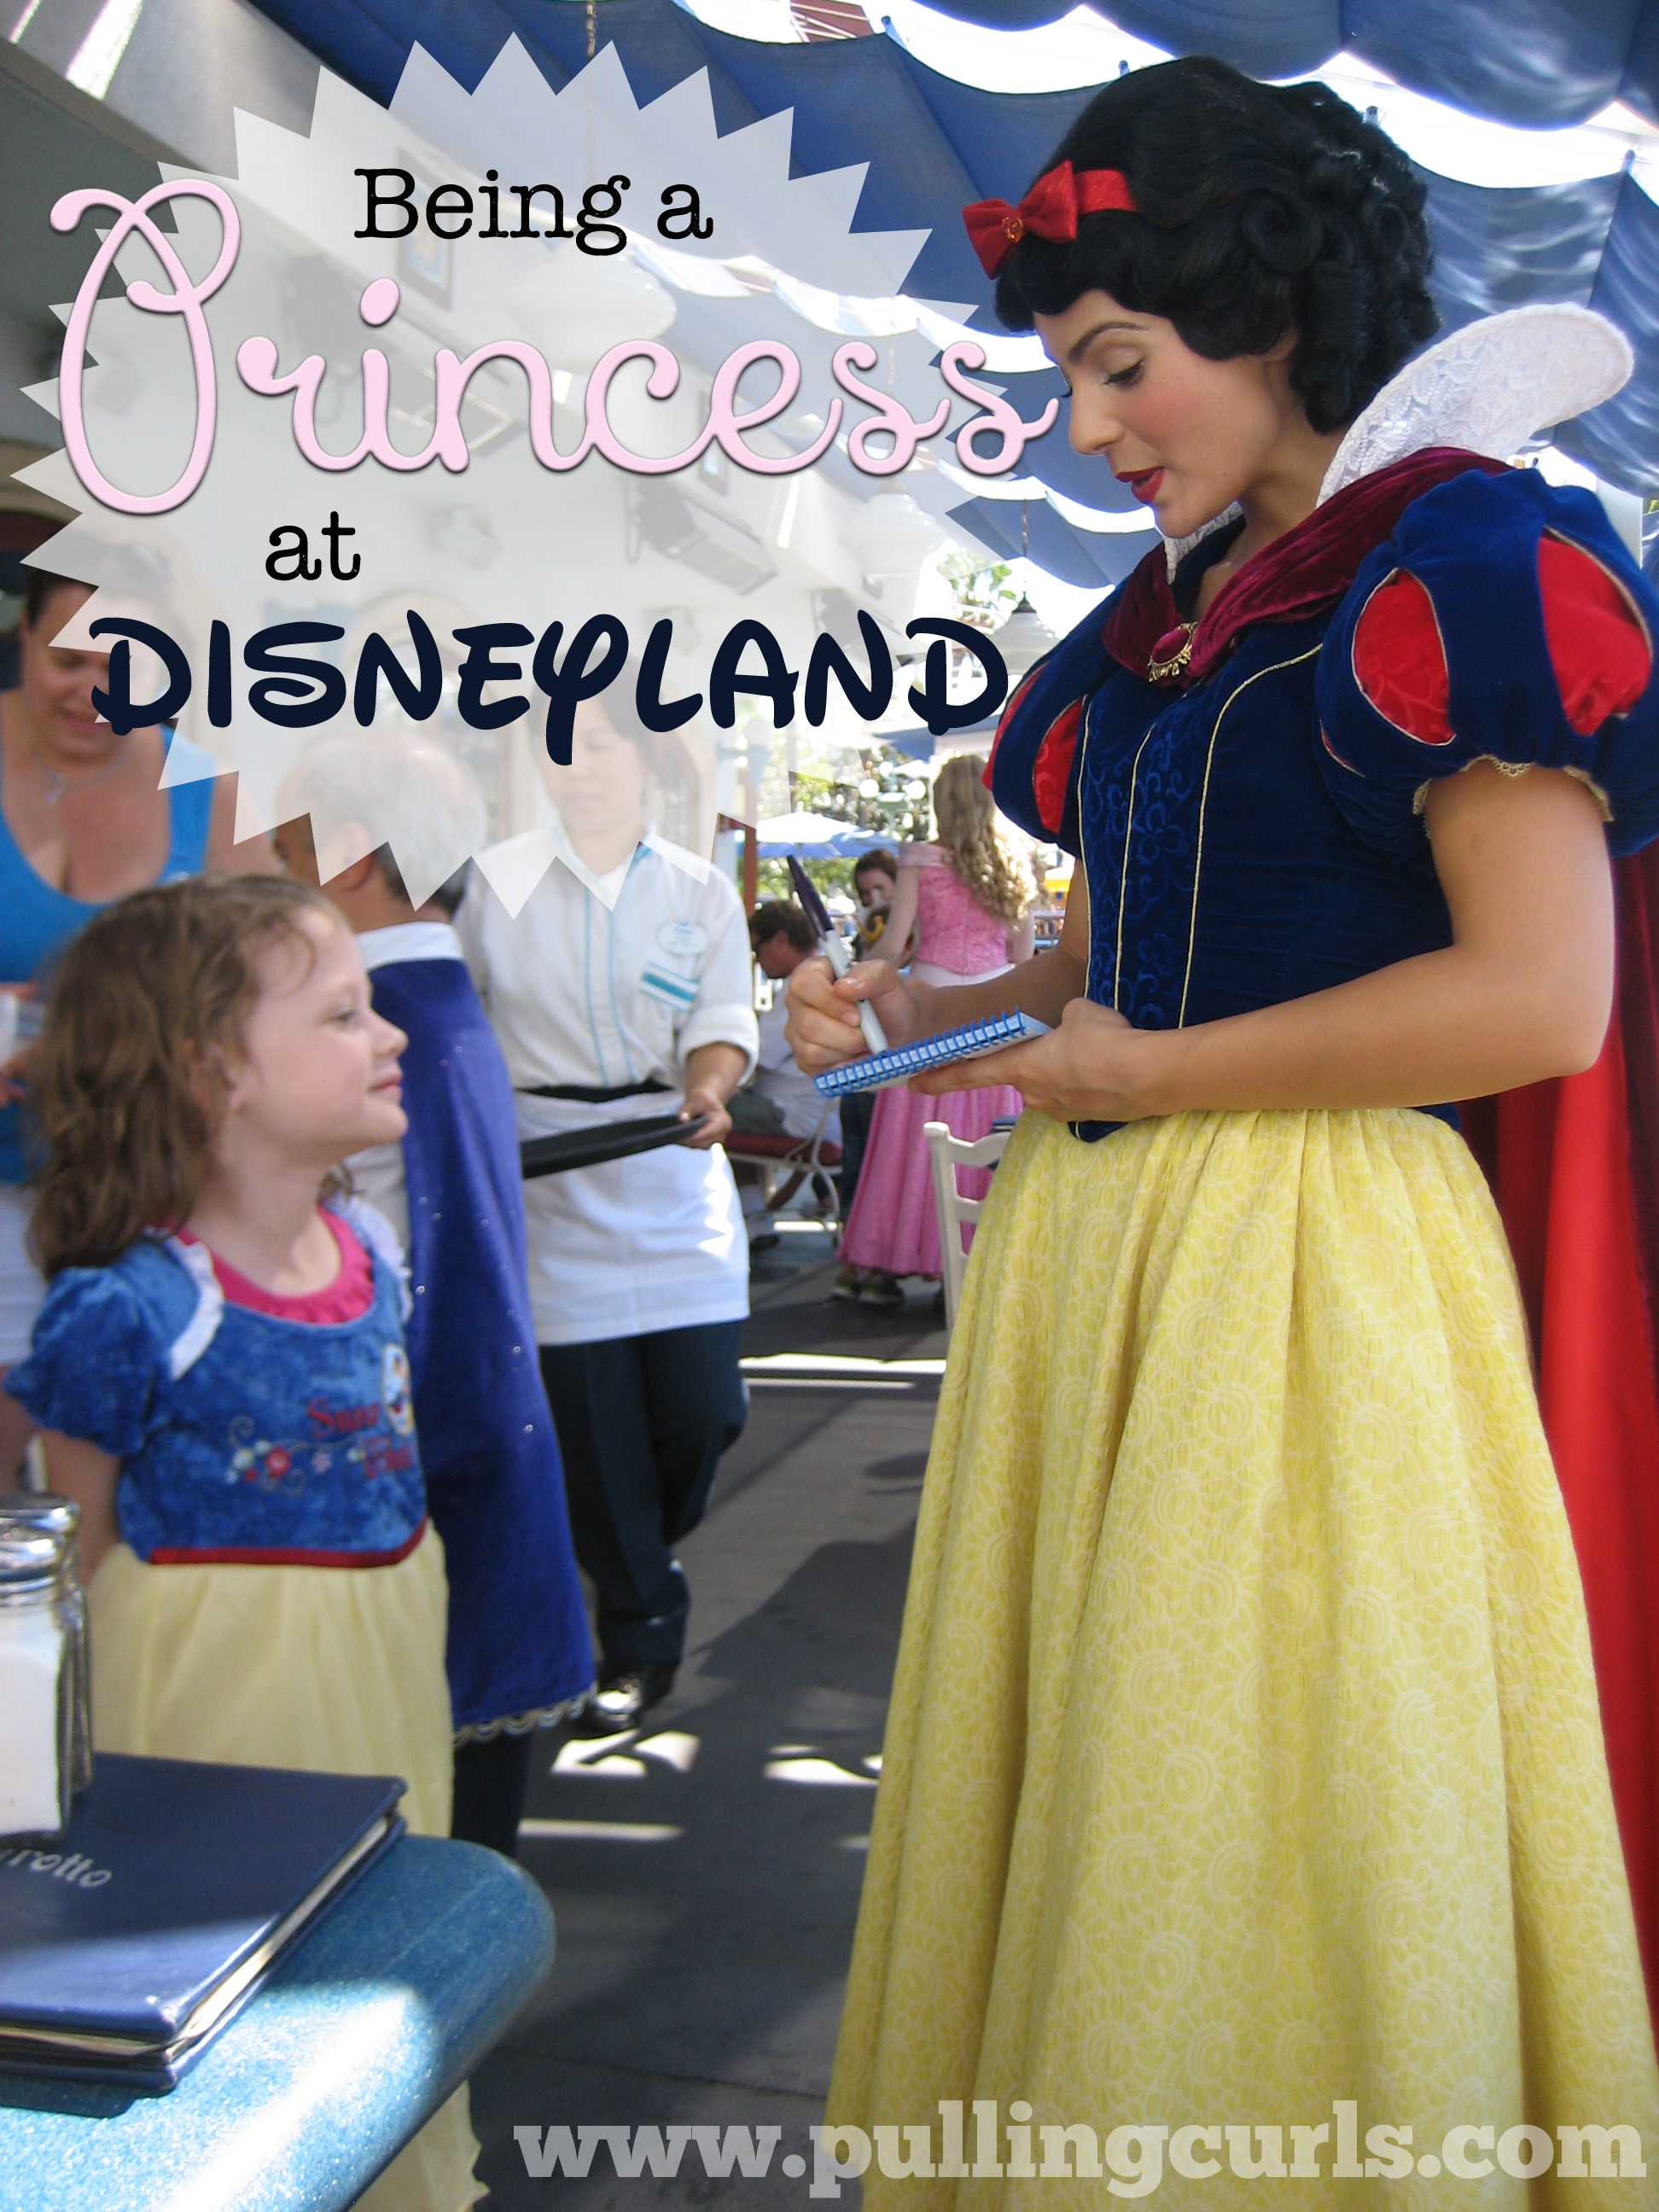 Being a princess at disneyland can be a lot of fun, with these 7 royal tips.